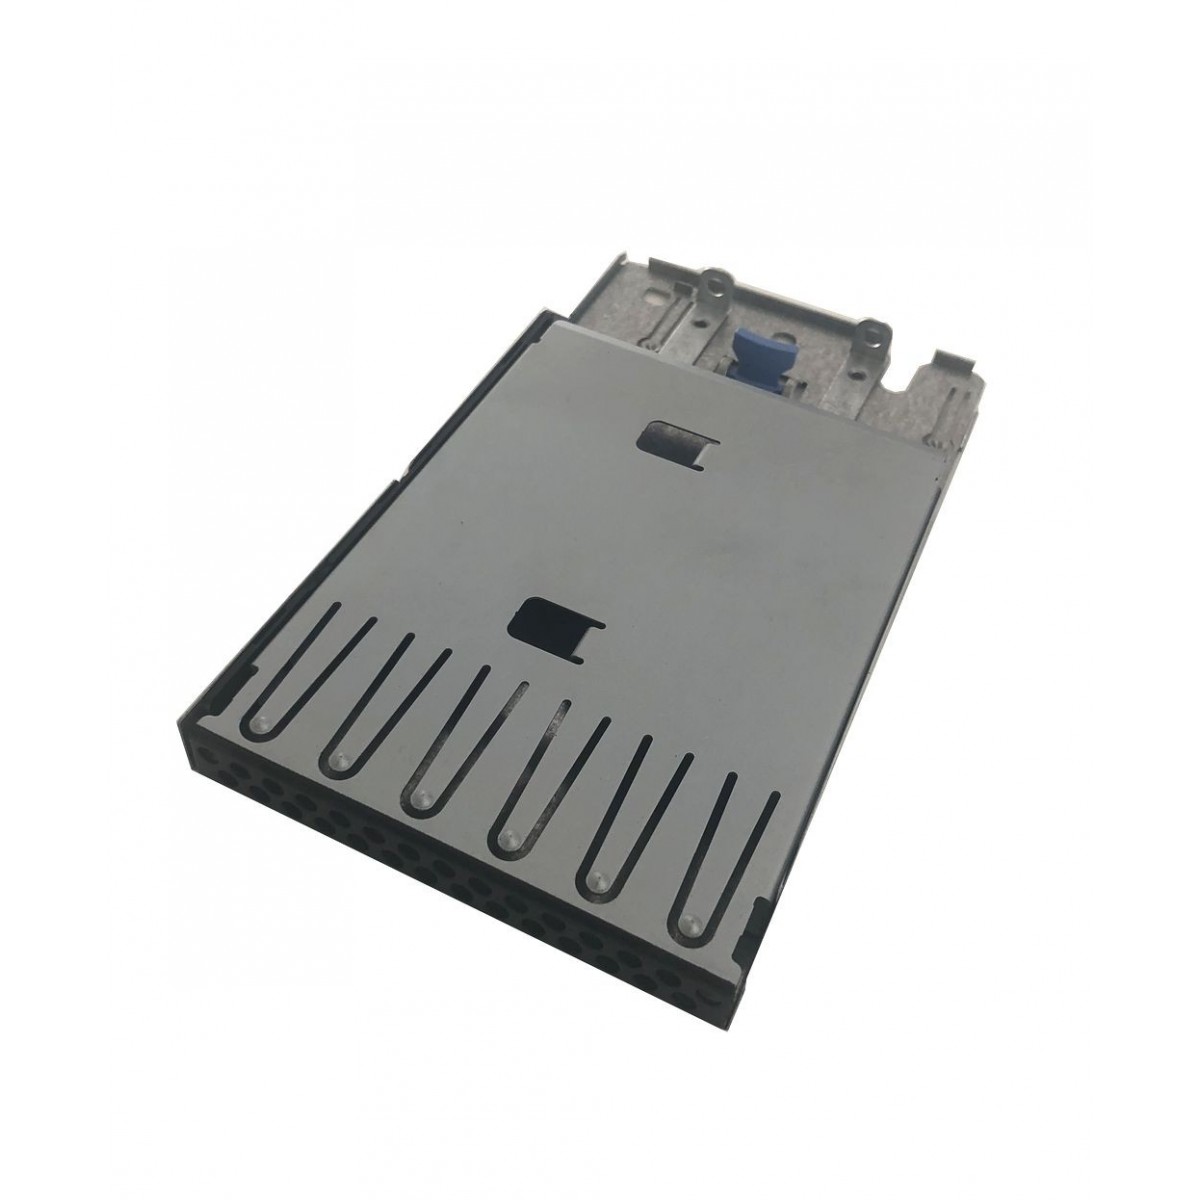 FLOPPY DISK DRIVE TRAY/CADDY DELL PE 2850 X8373